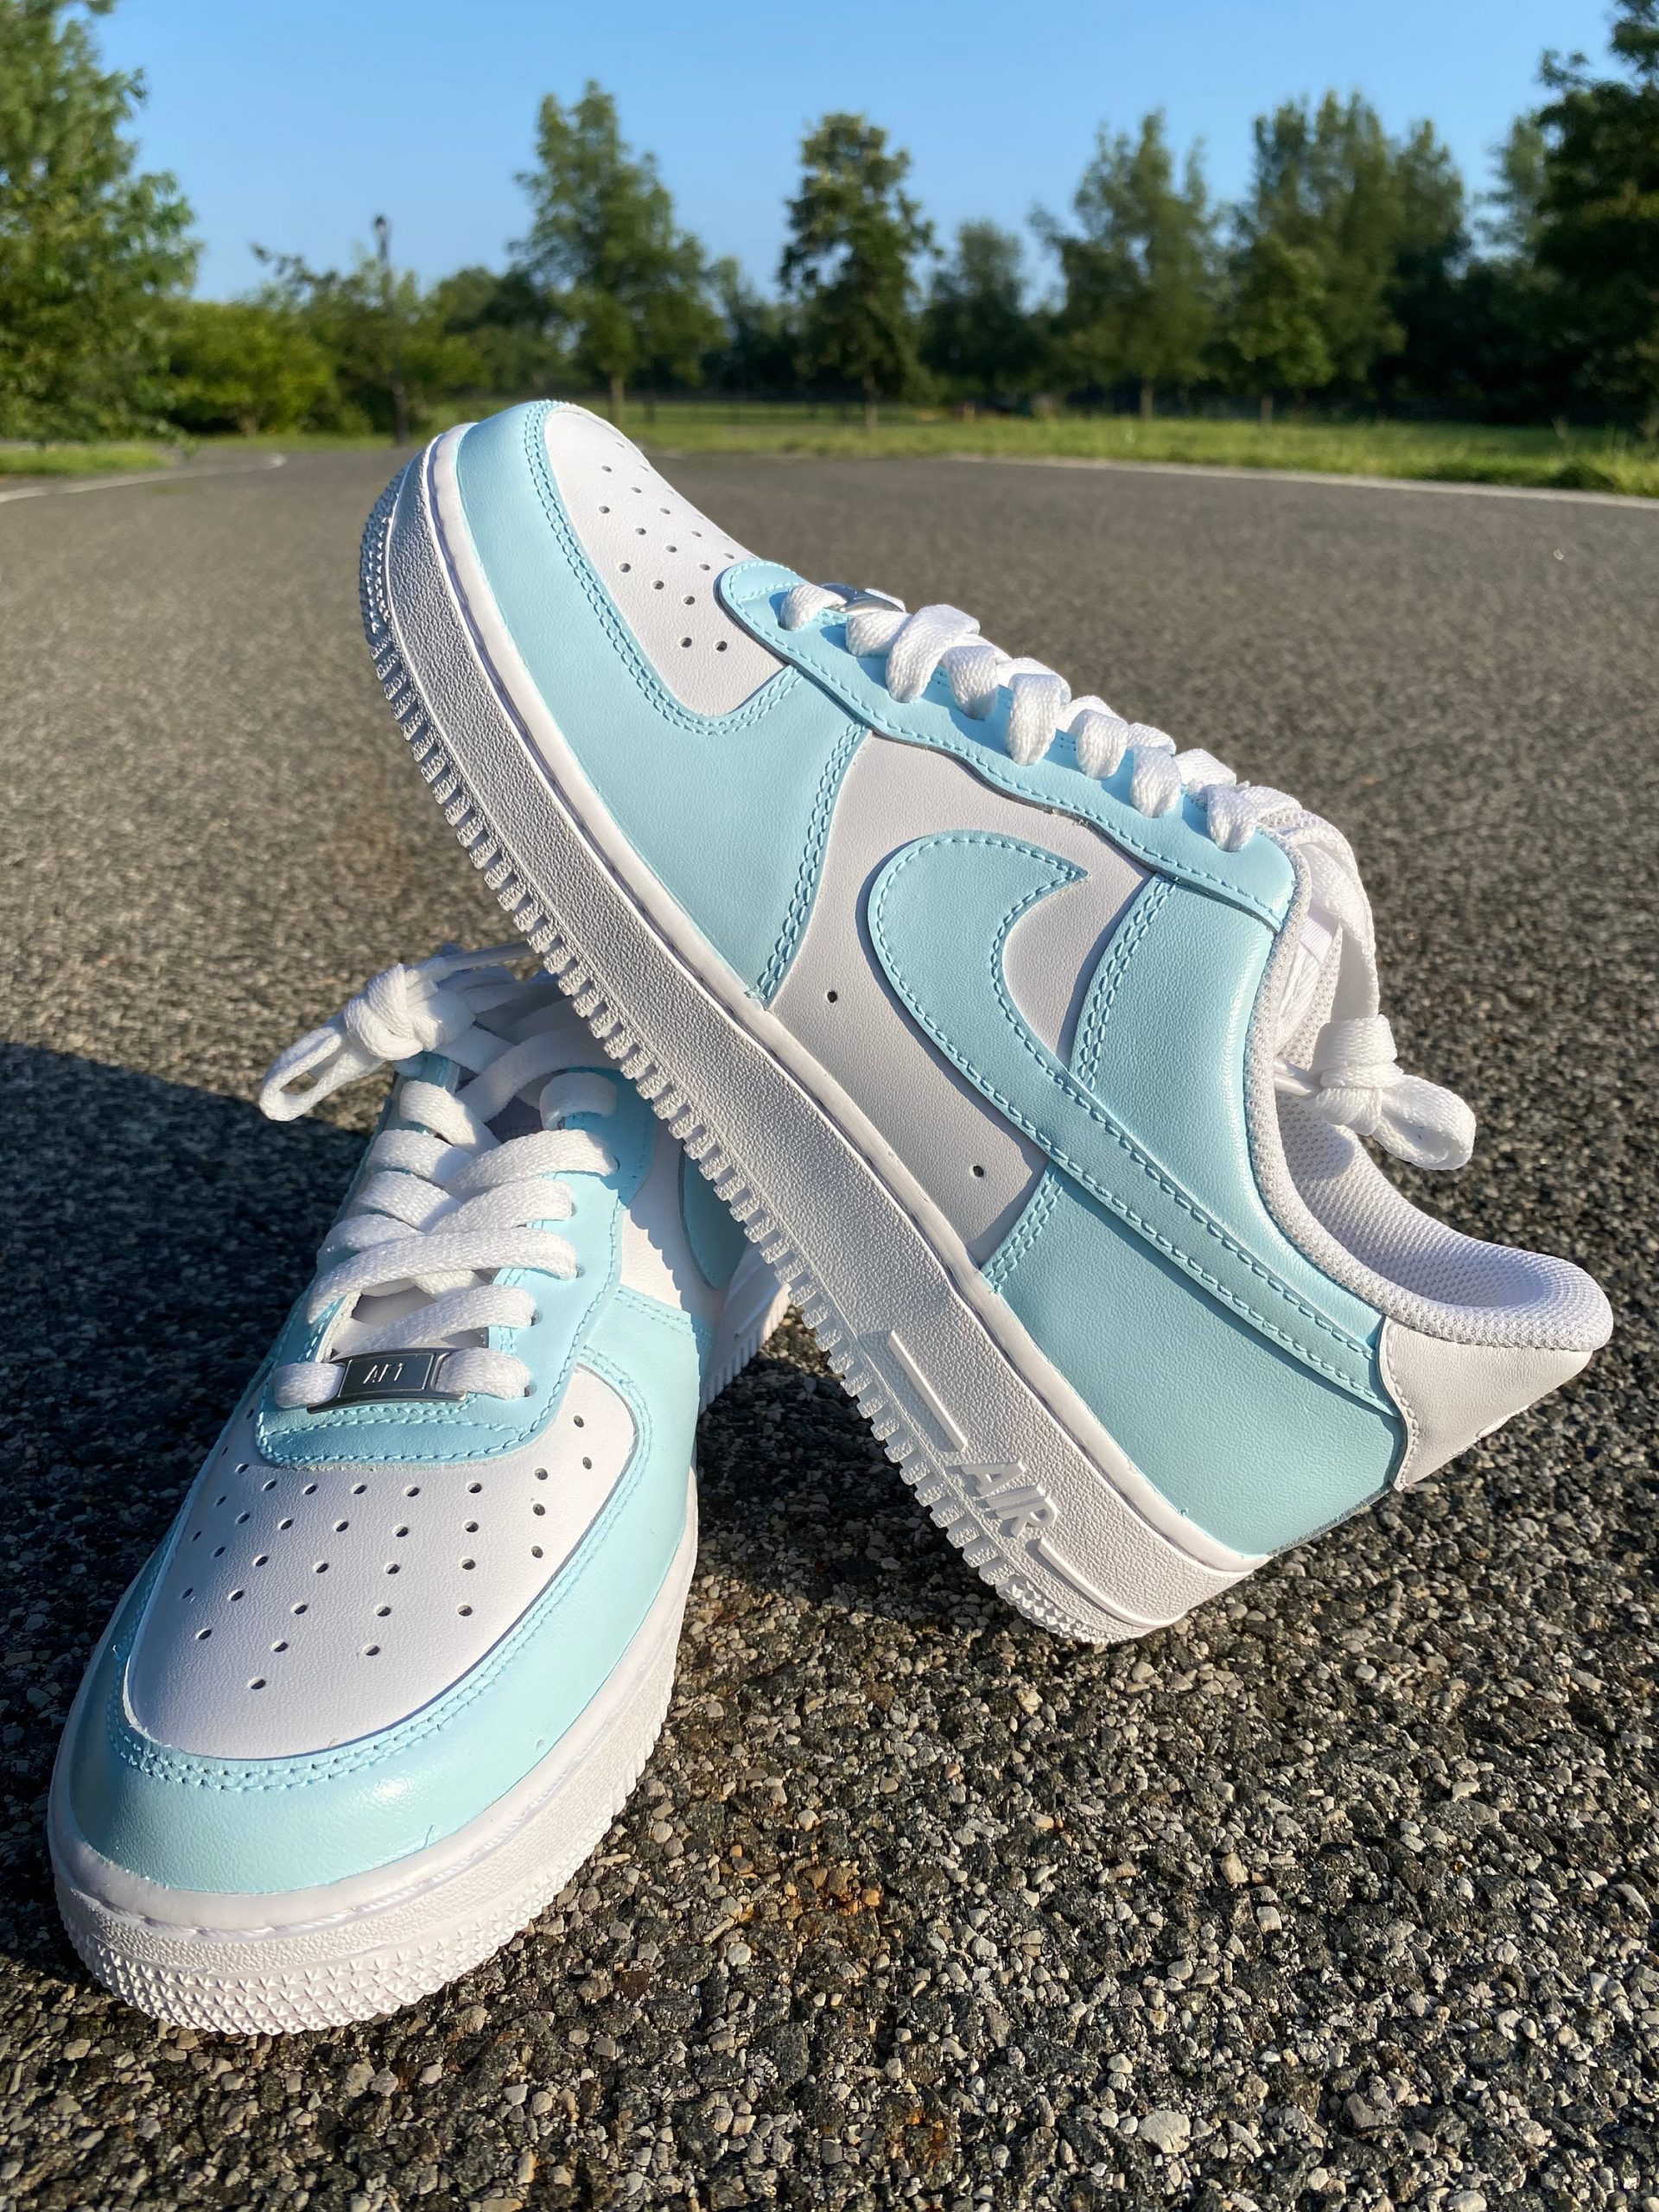 Blue/Baby Blue Nike Air Force 1 Low Custom Custom Blue pour Coloriage Air Force 1,